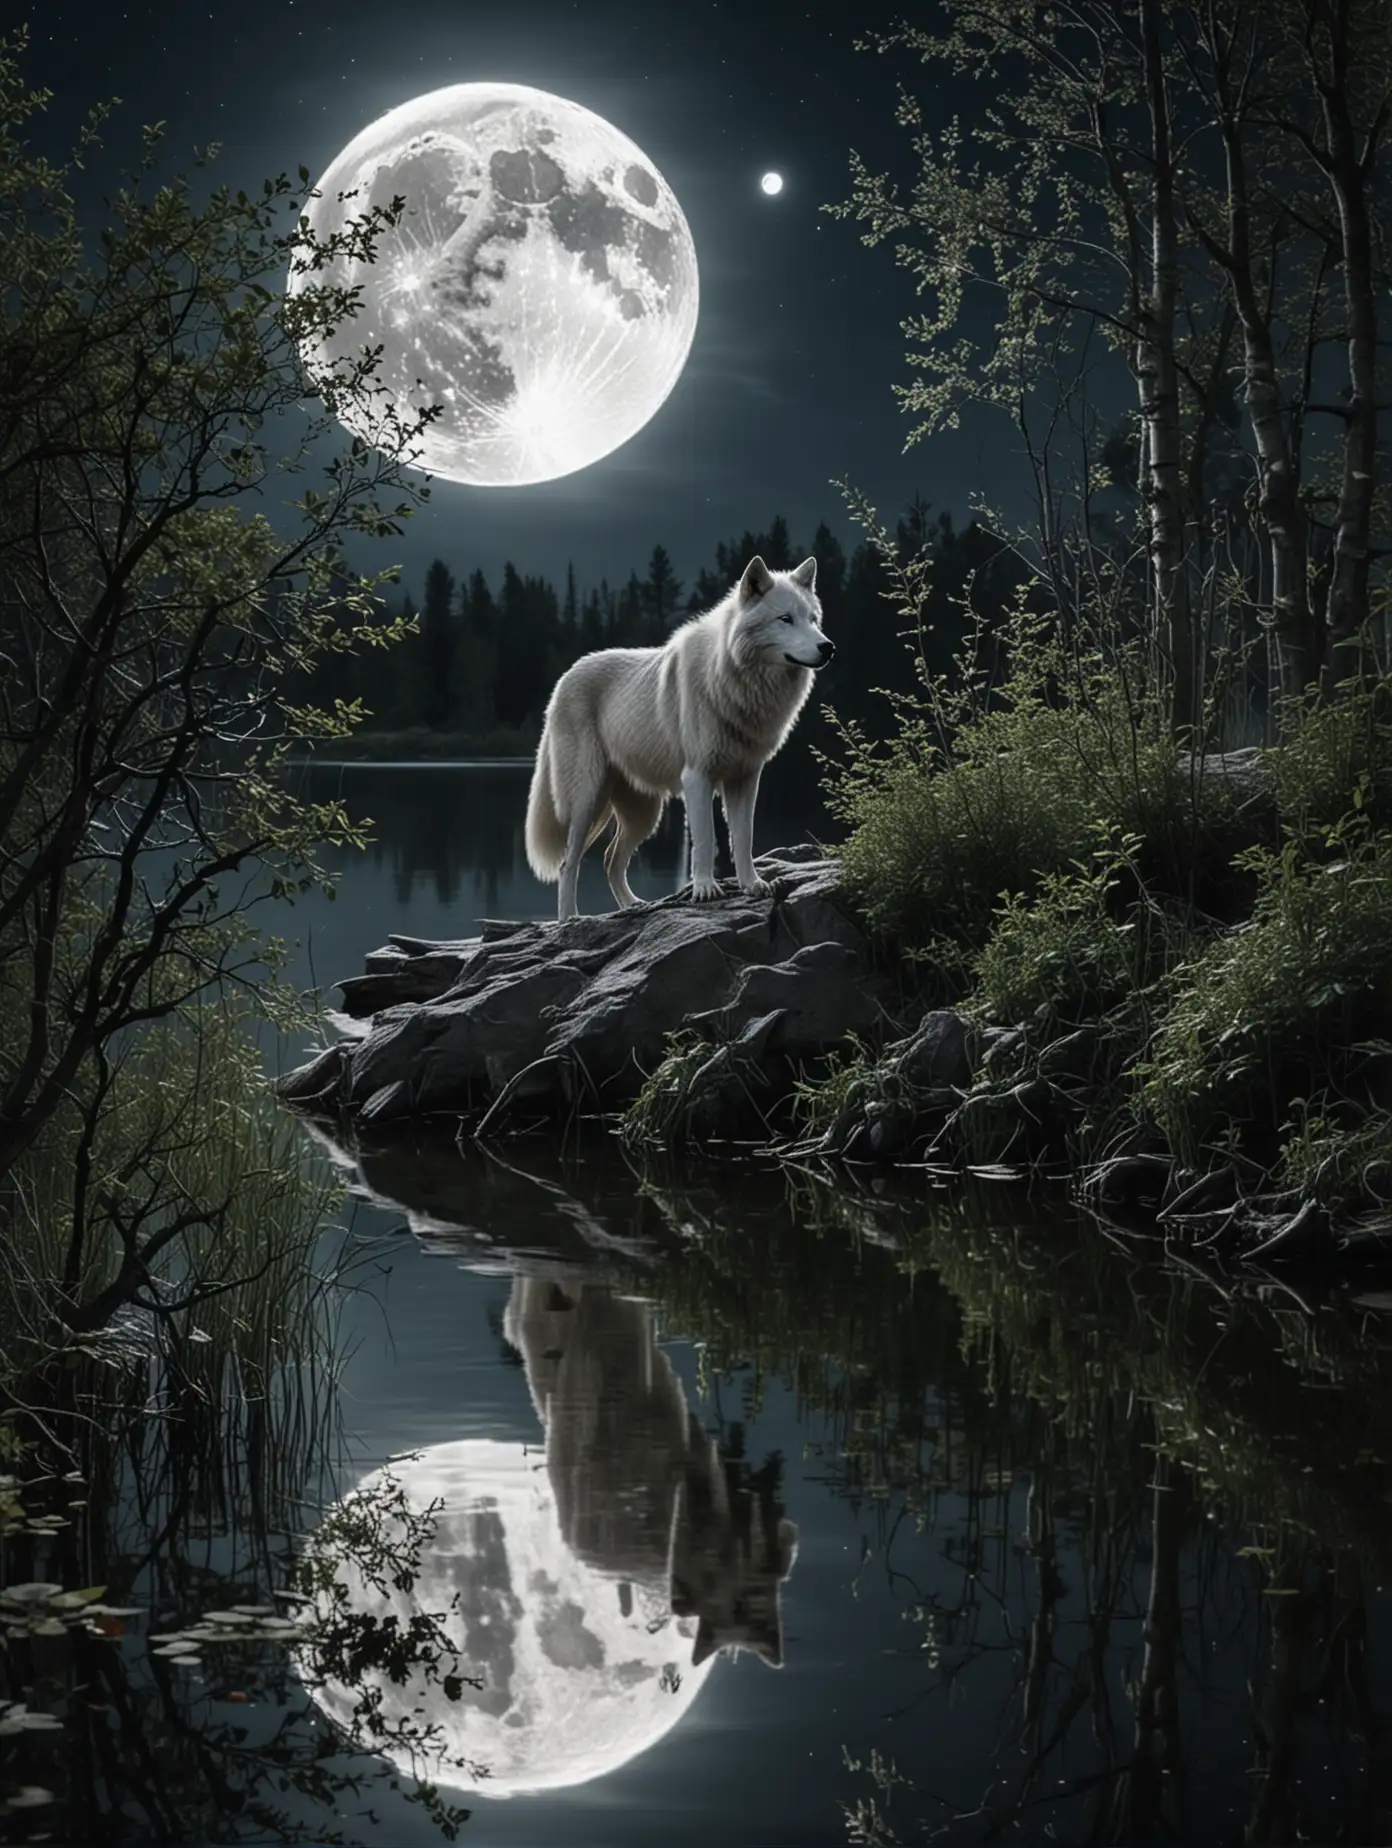 Majestic-Moon-Reflection-in-Lake-with-Howling-White-Wolf